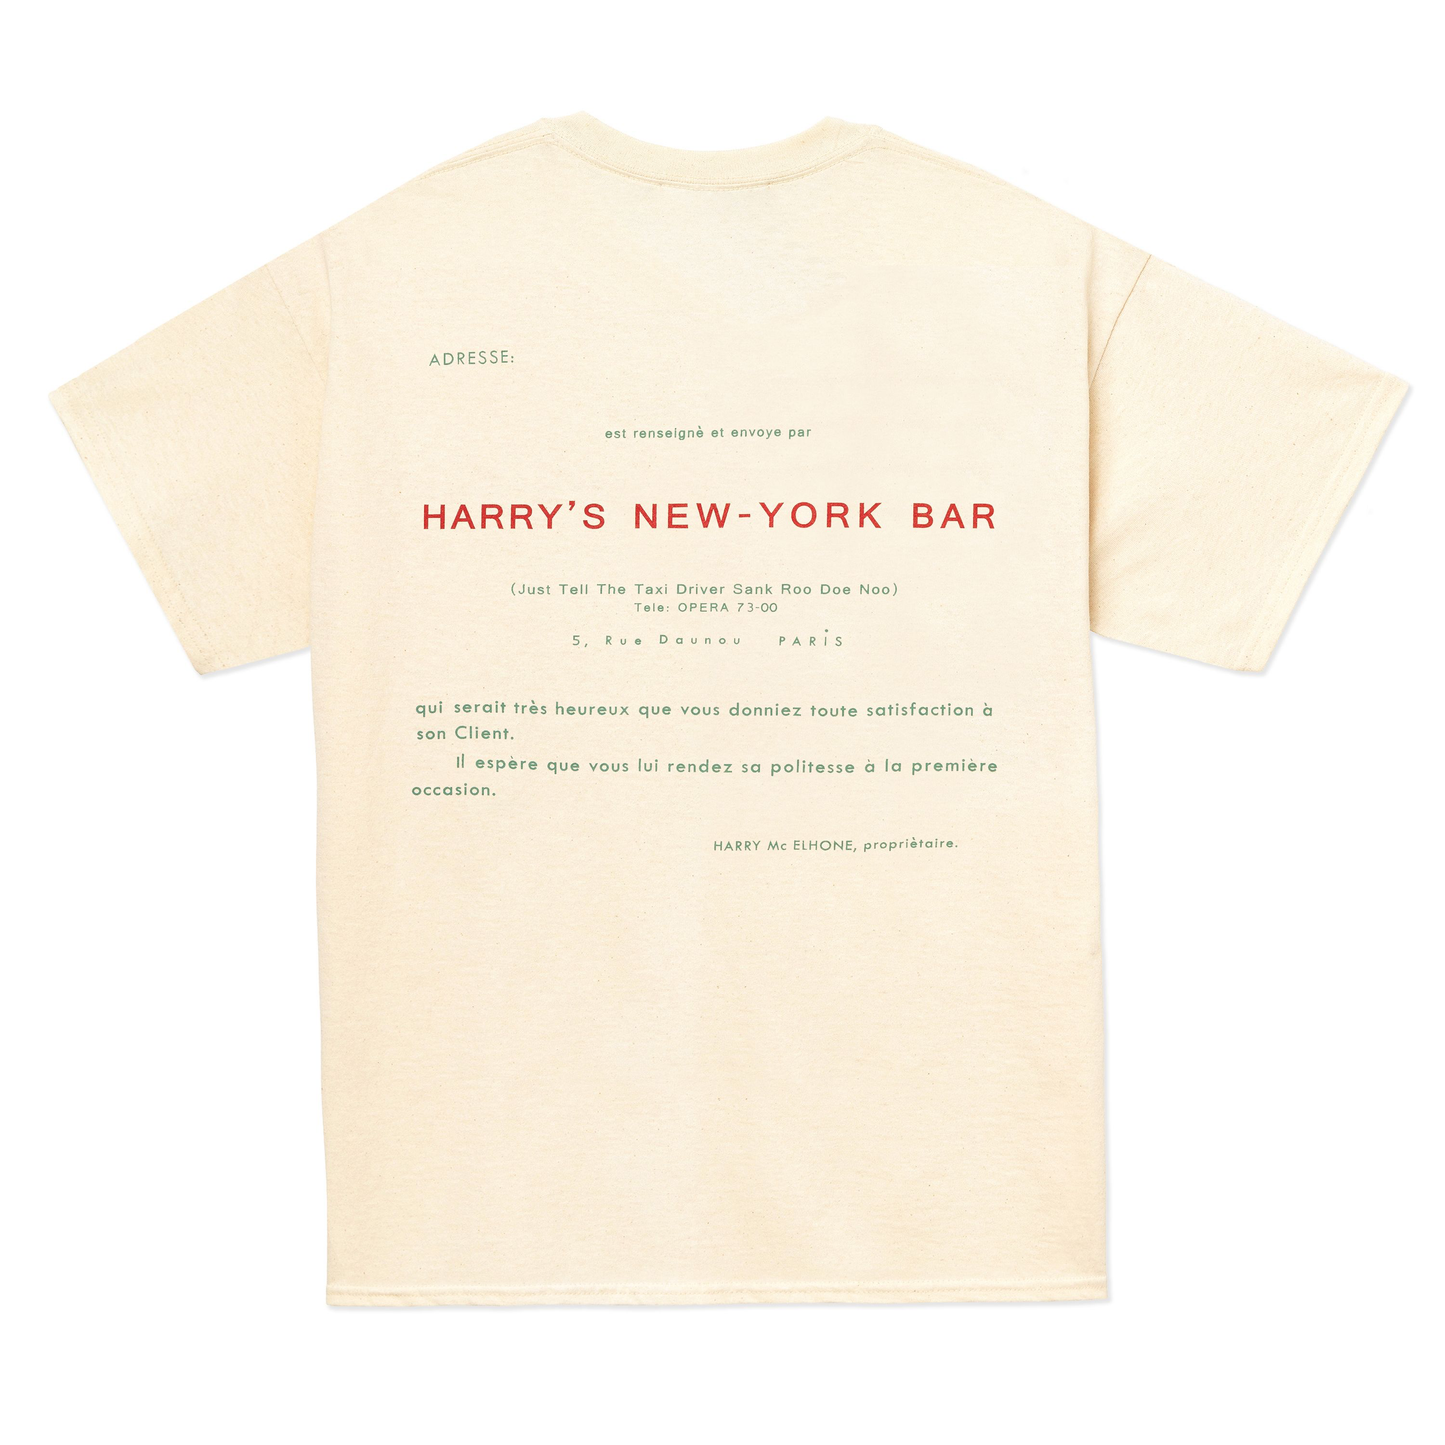 Ivory short sleeve tee printed with Harry's address on the back.